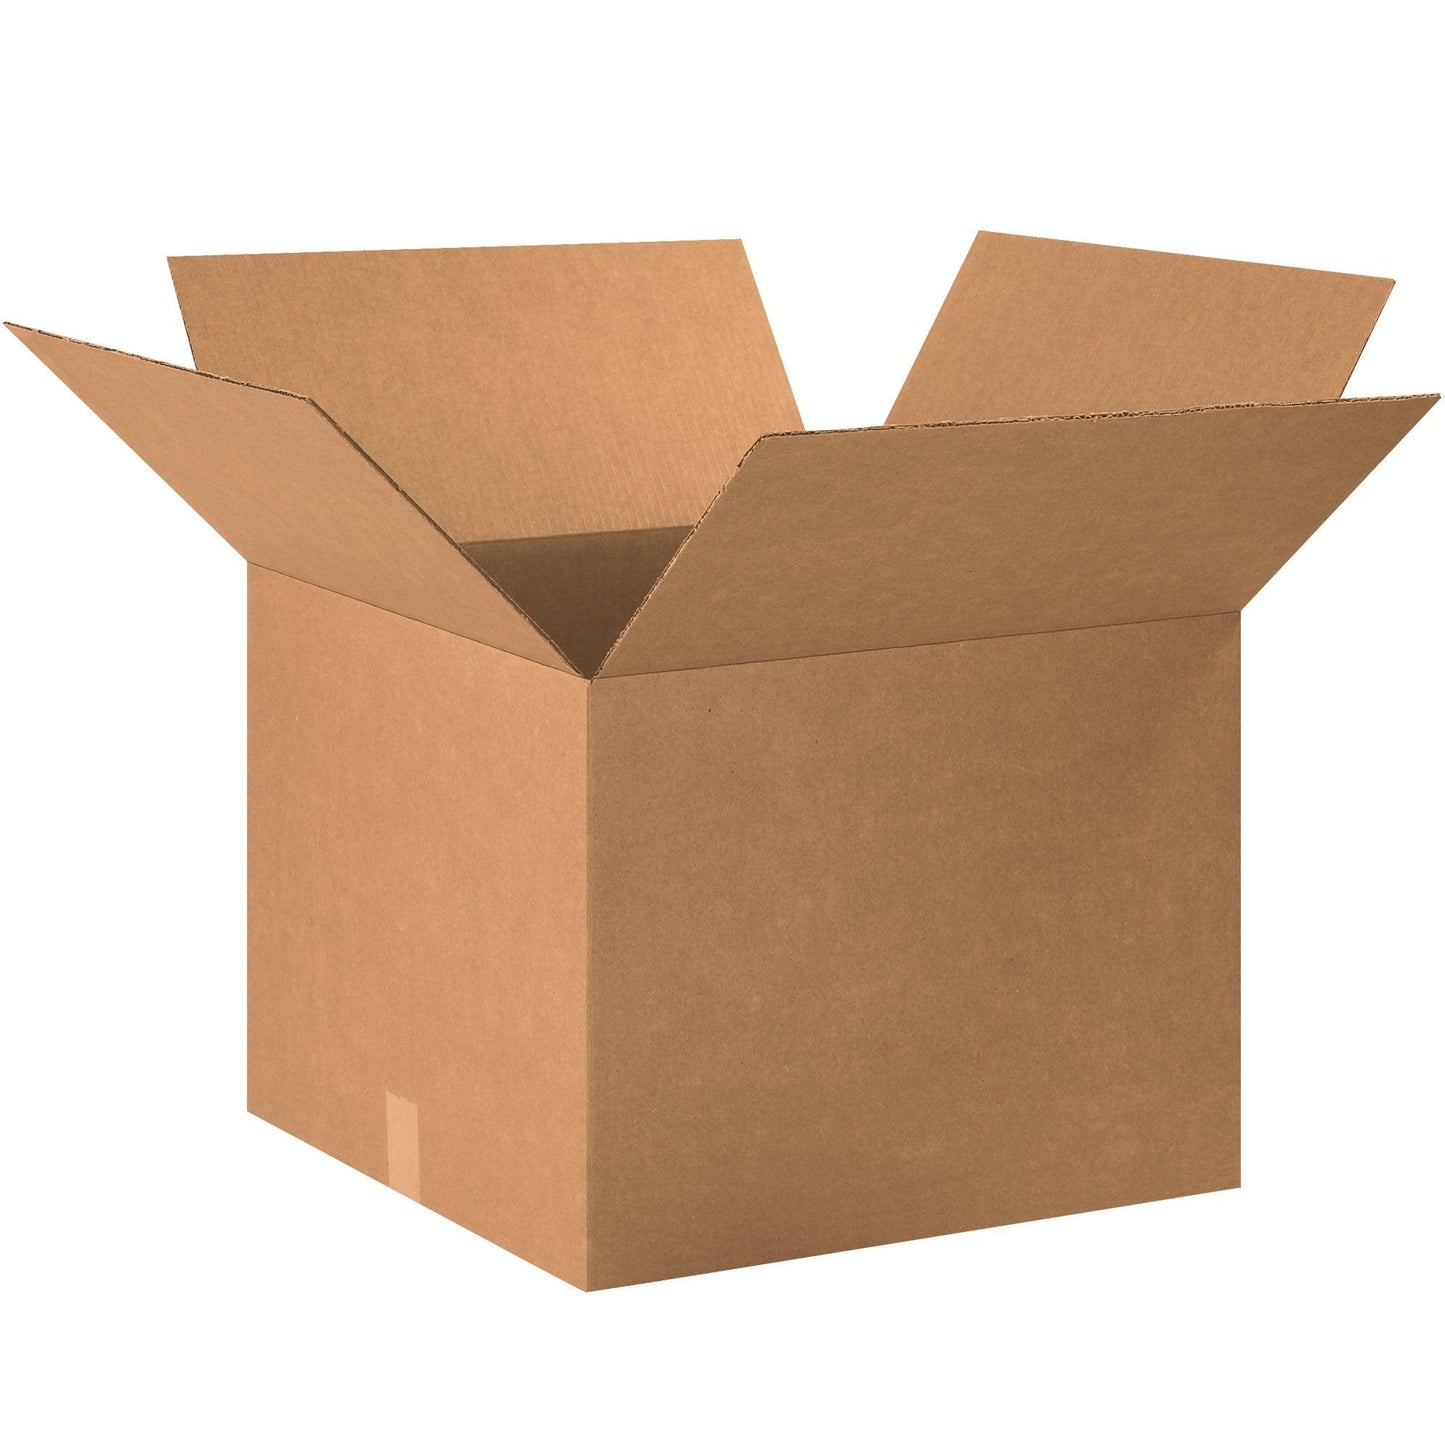 20 x 20 x 15" (12 Pack) Corrugated Boxes - 202015RP12